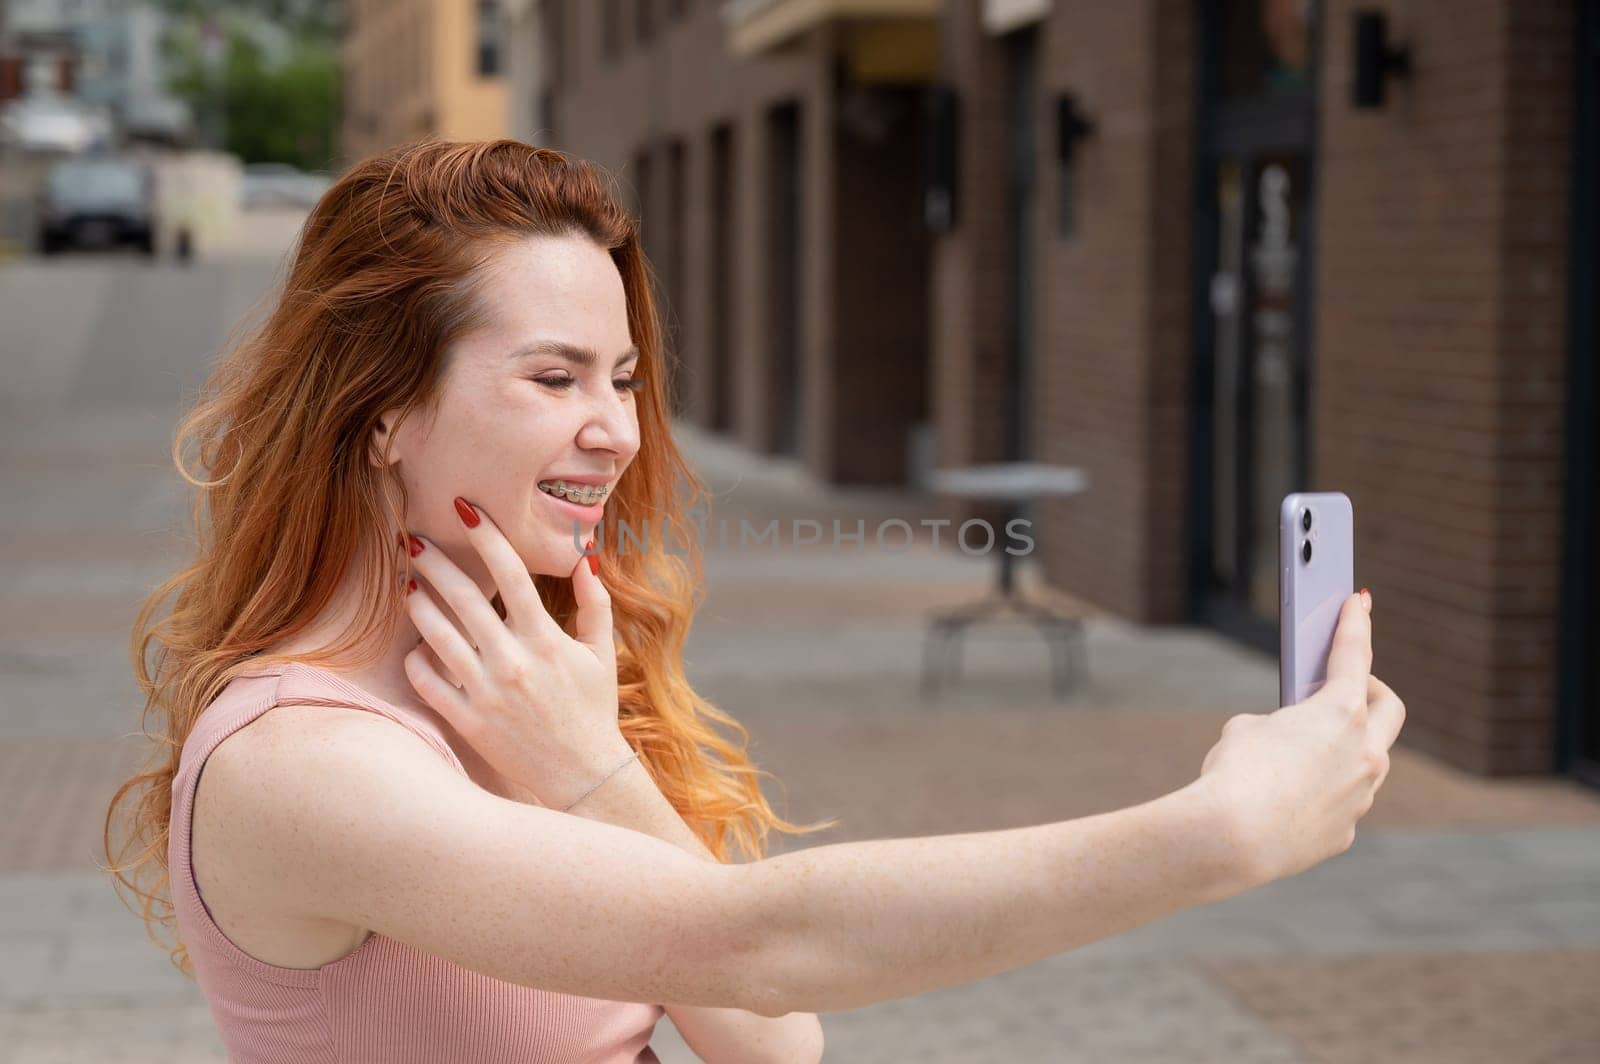 Young woman with braces on her teeth smiles and takes a selfie on a smartphone outdoors. by mrwed54